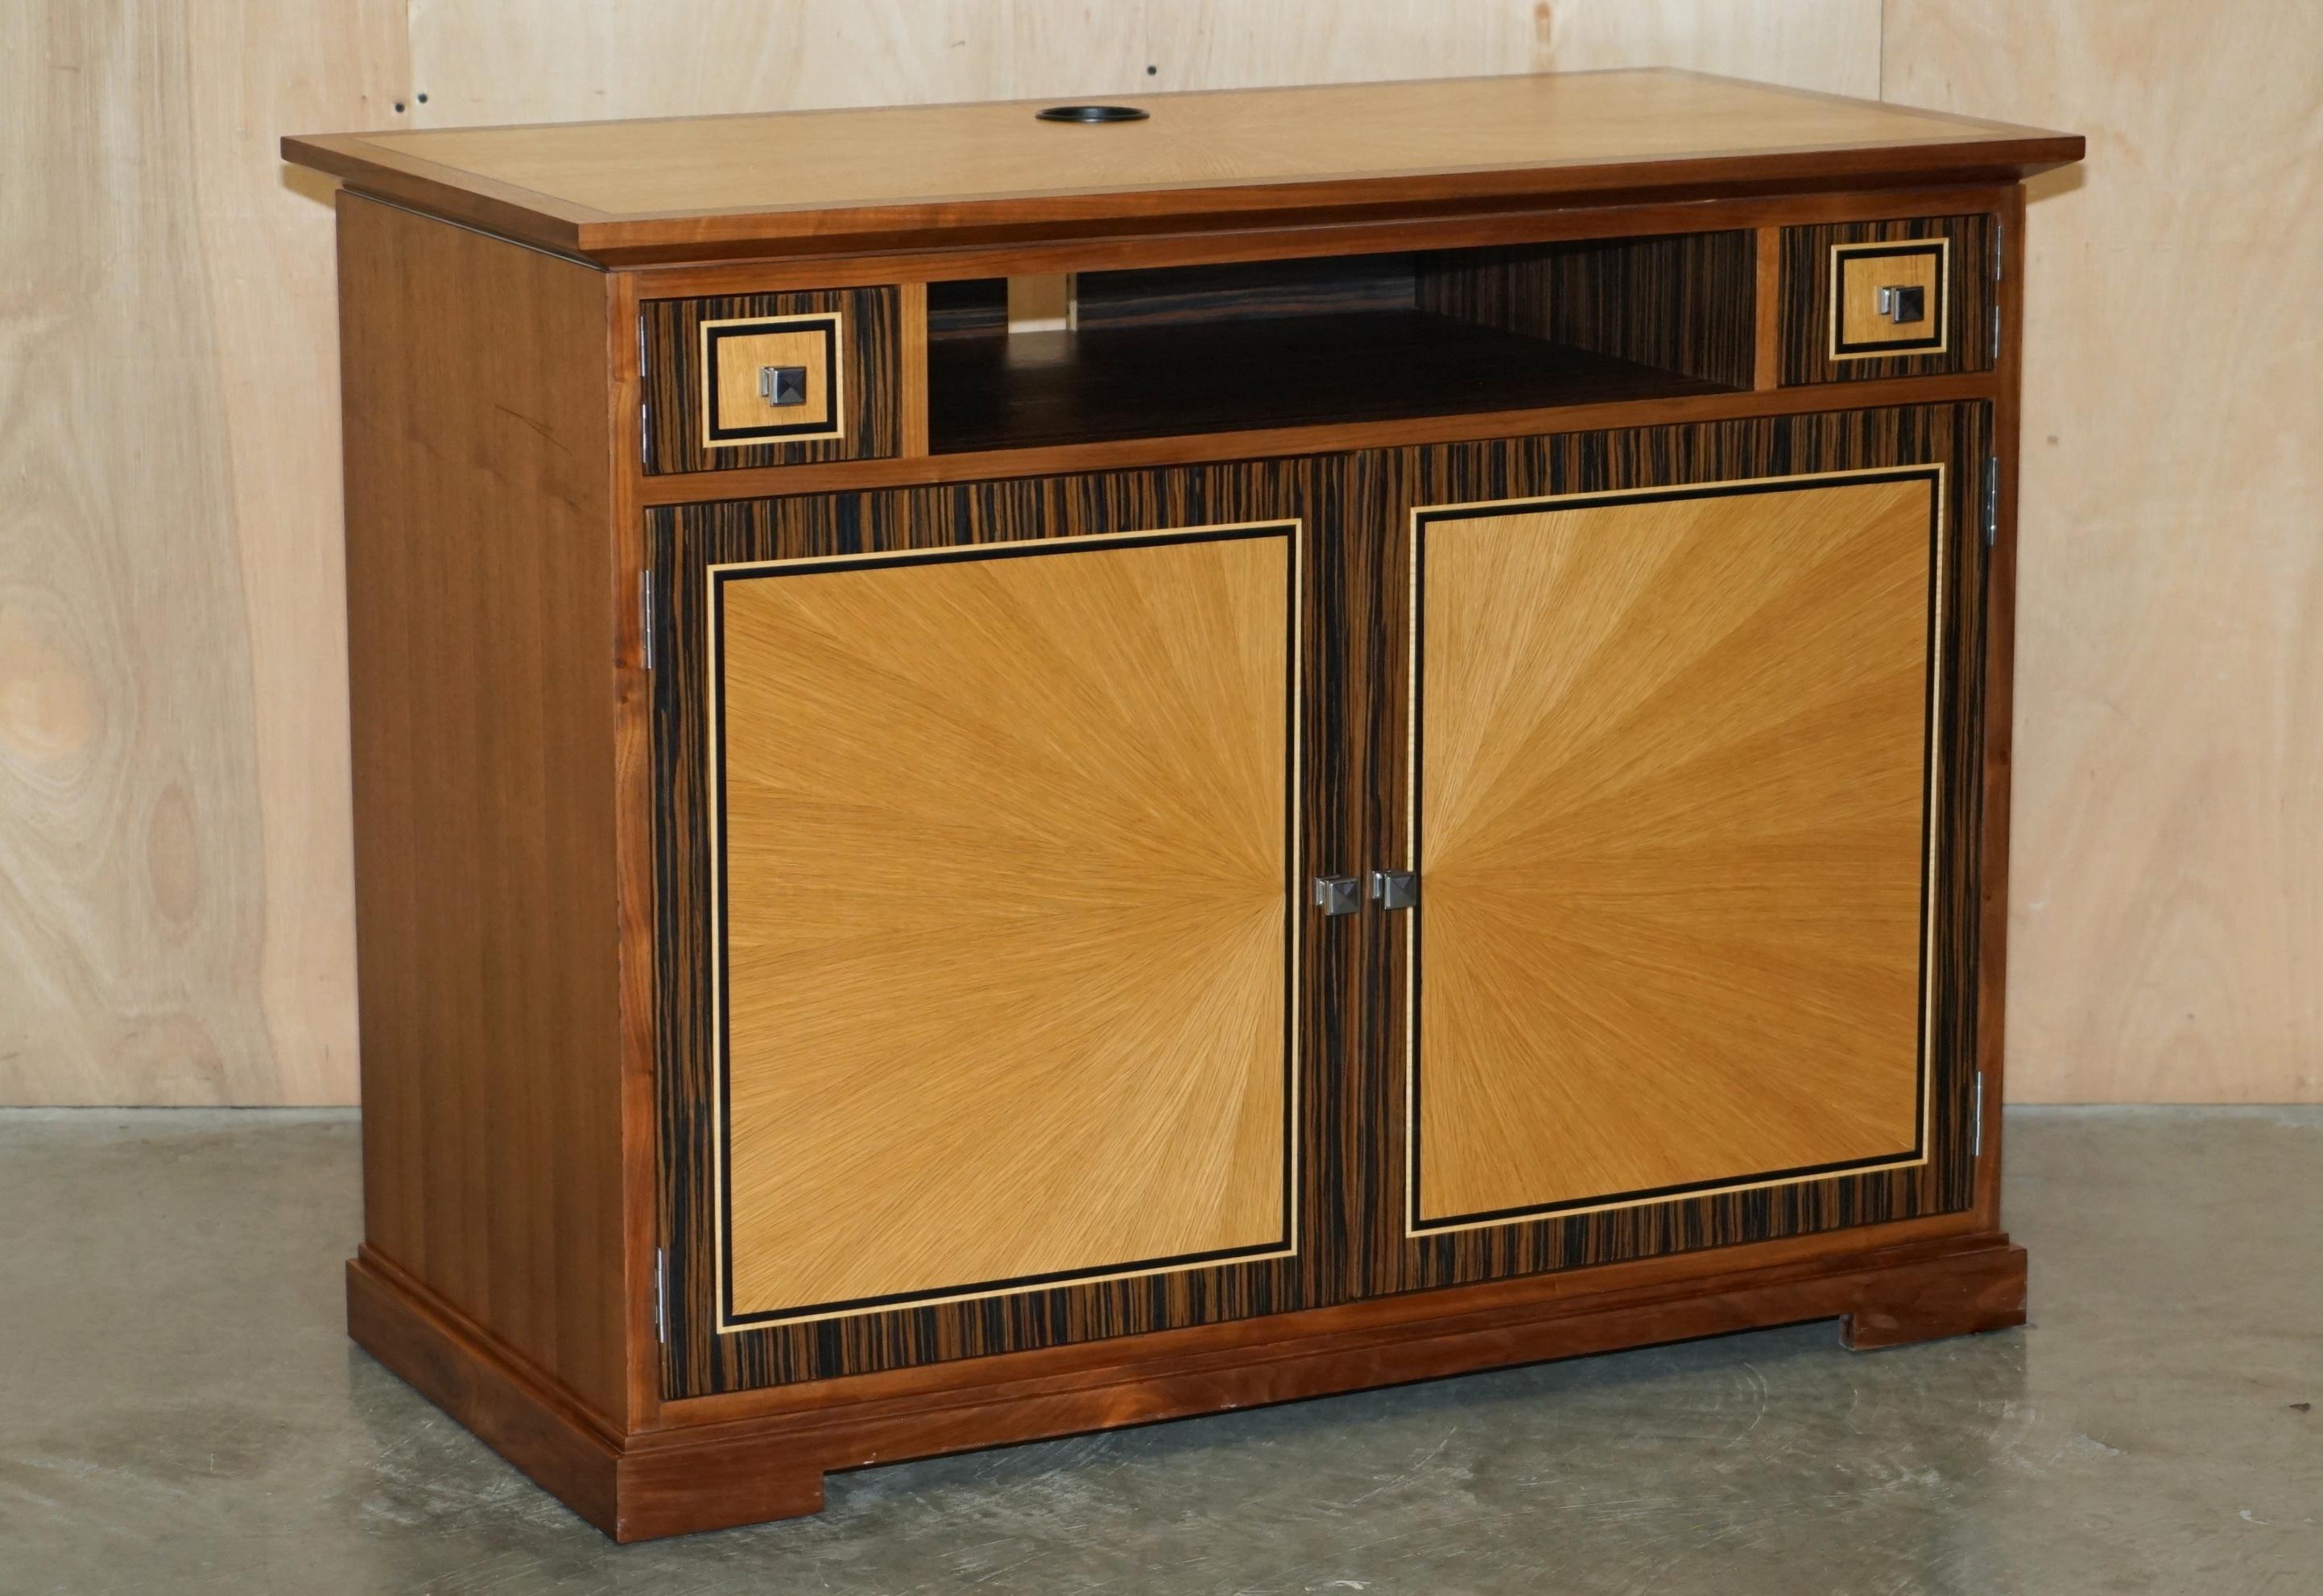 Royal House Antiques

Royal House Antiques is delighted to offer for sale this absolutely exquisite Viscount David Linley Satinwood & Macassar Ebony sideboard designed to seat a television and house media boxes

Please note the delivery fee listed